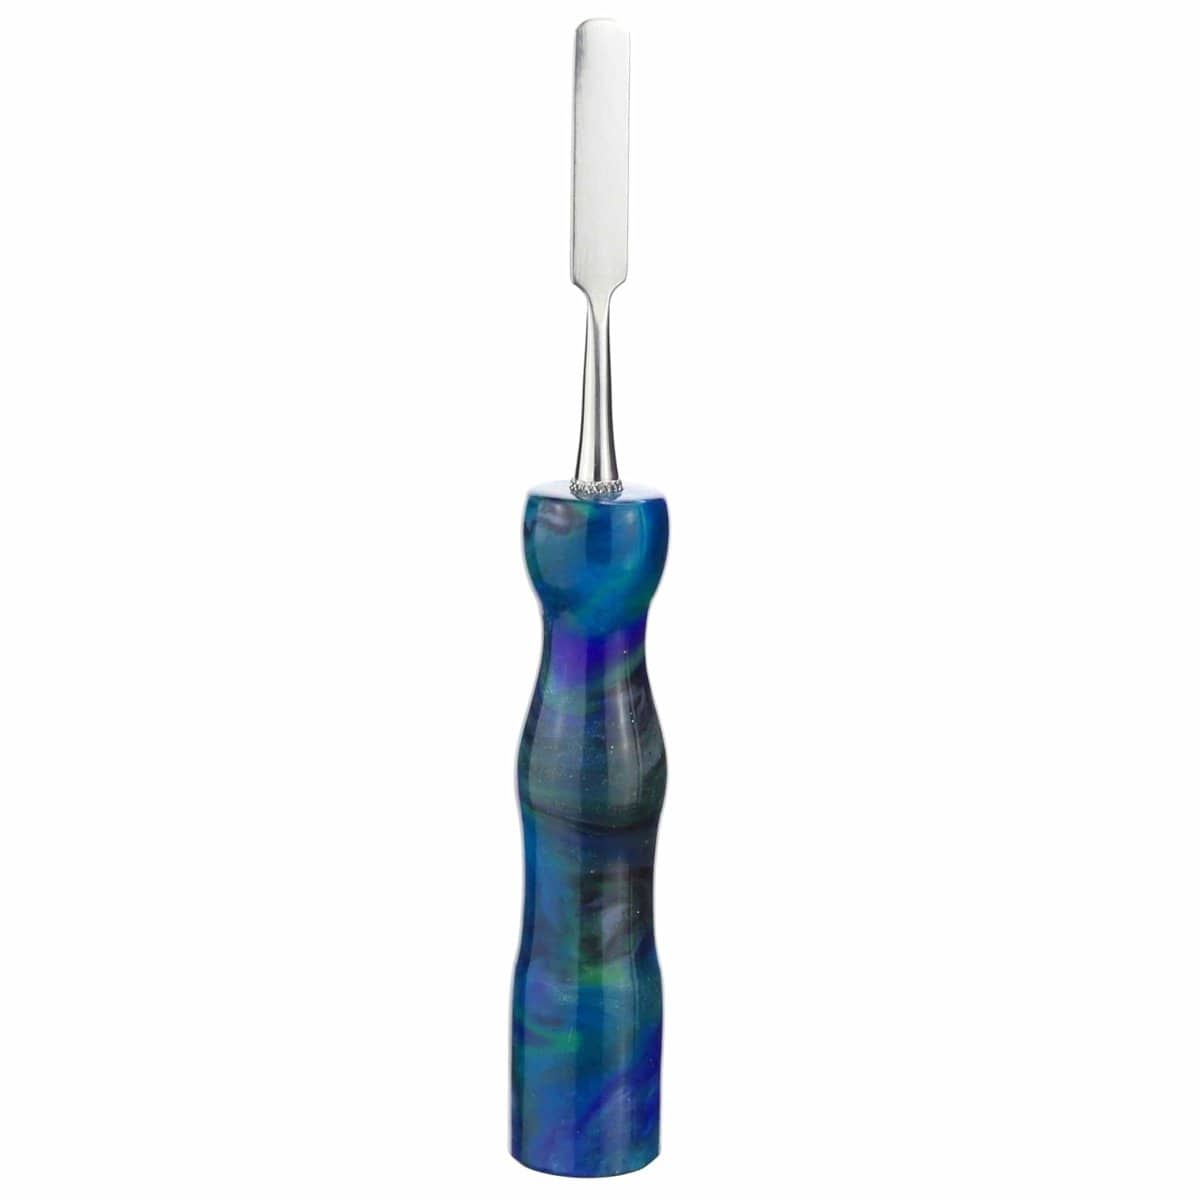 Galactic Crafts Accessory Design 4- Flat Space Daze Resin Dab Tool